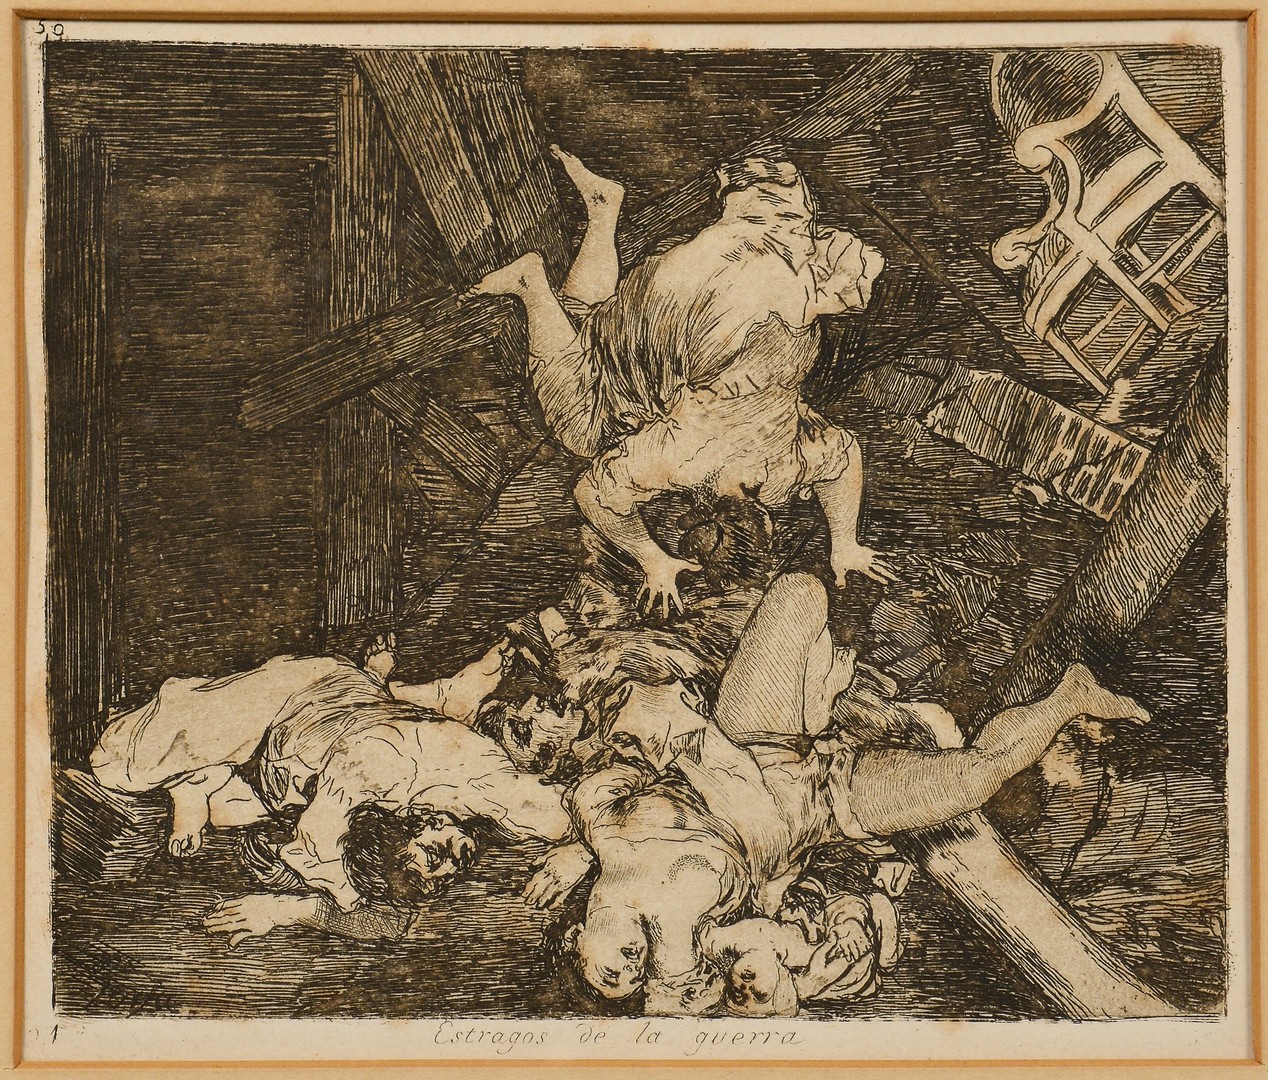 Lot 193: Goya Etching, #30 from The Disasters of War Series